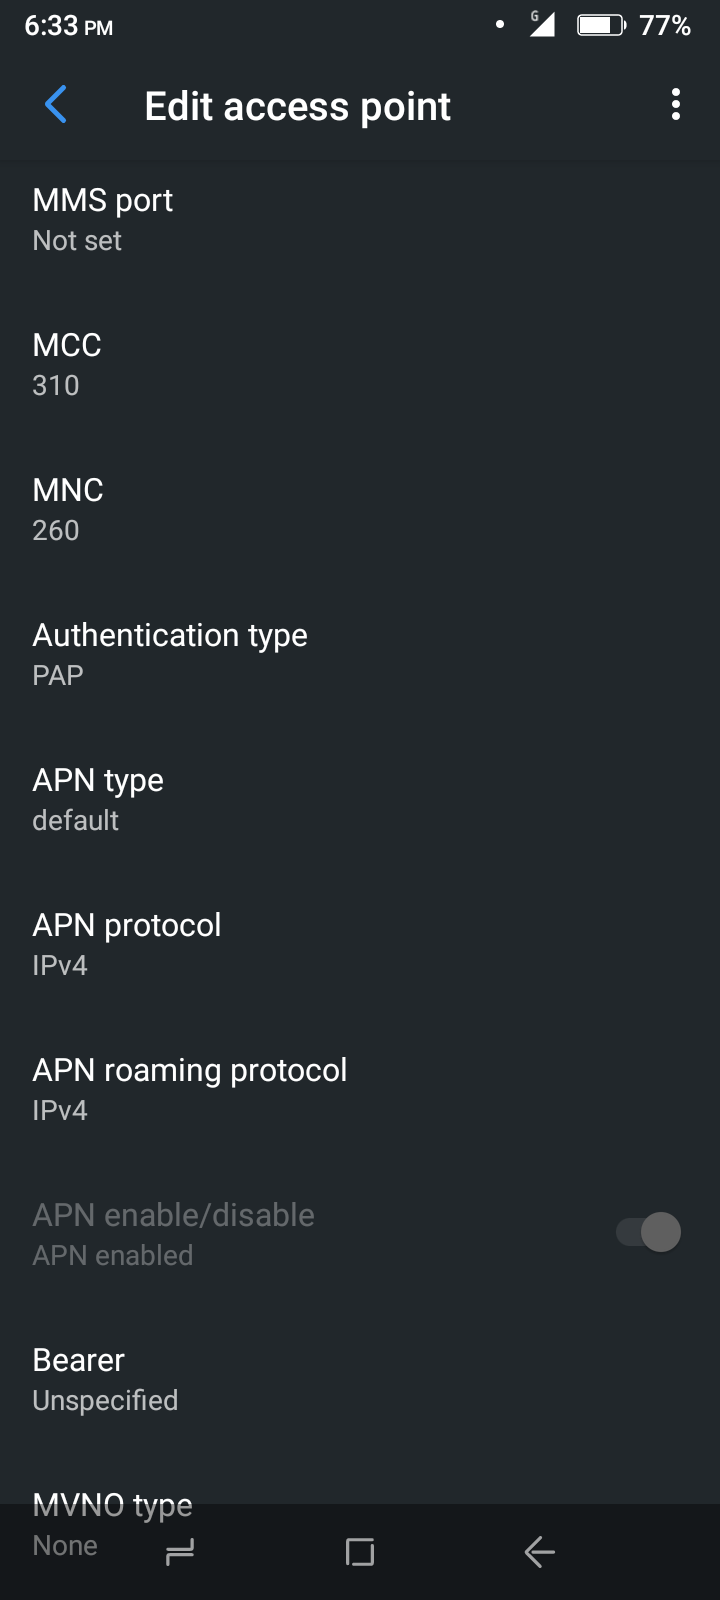 t-mobile apn settings that can be modified